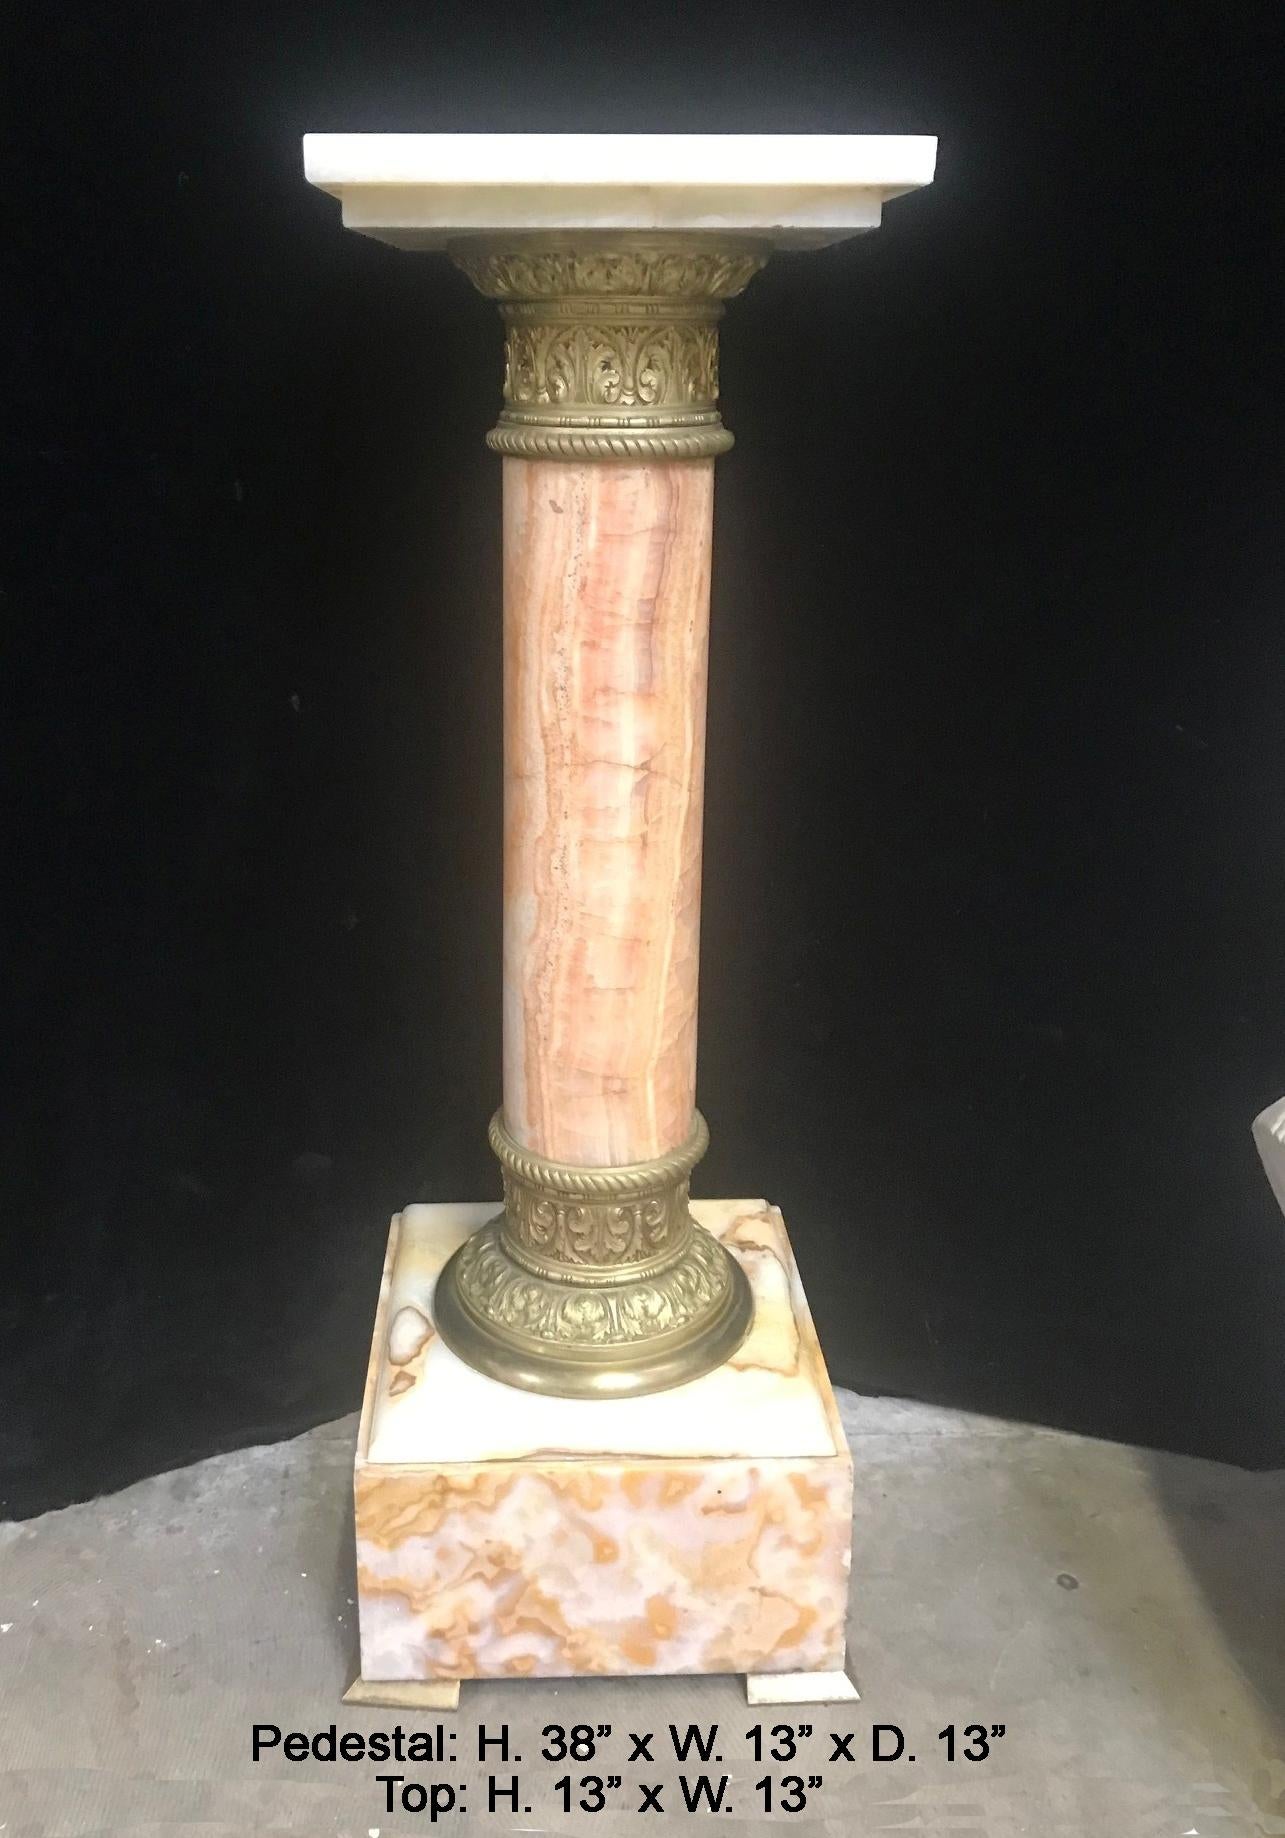 An impressive 19th Century French bronze mounted onyx pedestal.
The pedestal is surmounted by a square onyx top, over an onyx column mounted with foliate-inspired and reeded gilt bronze, raised on an onyx base.
Top size : 12.5